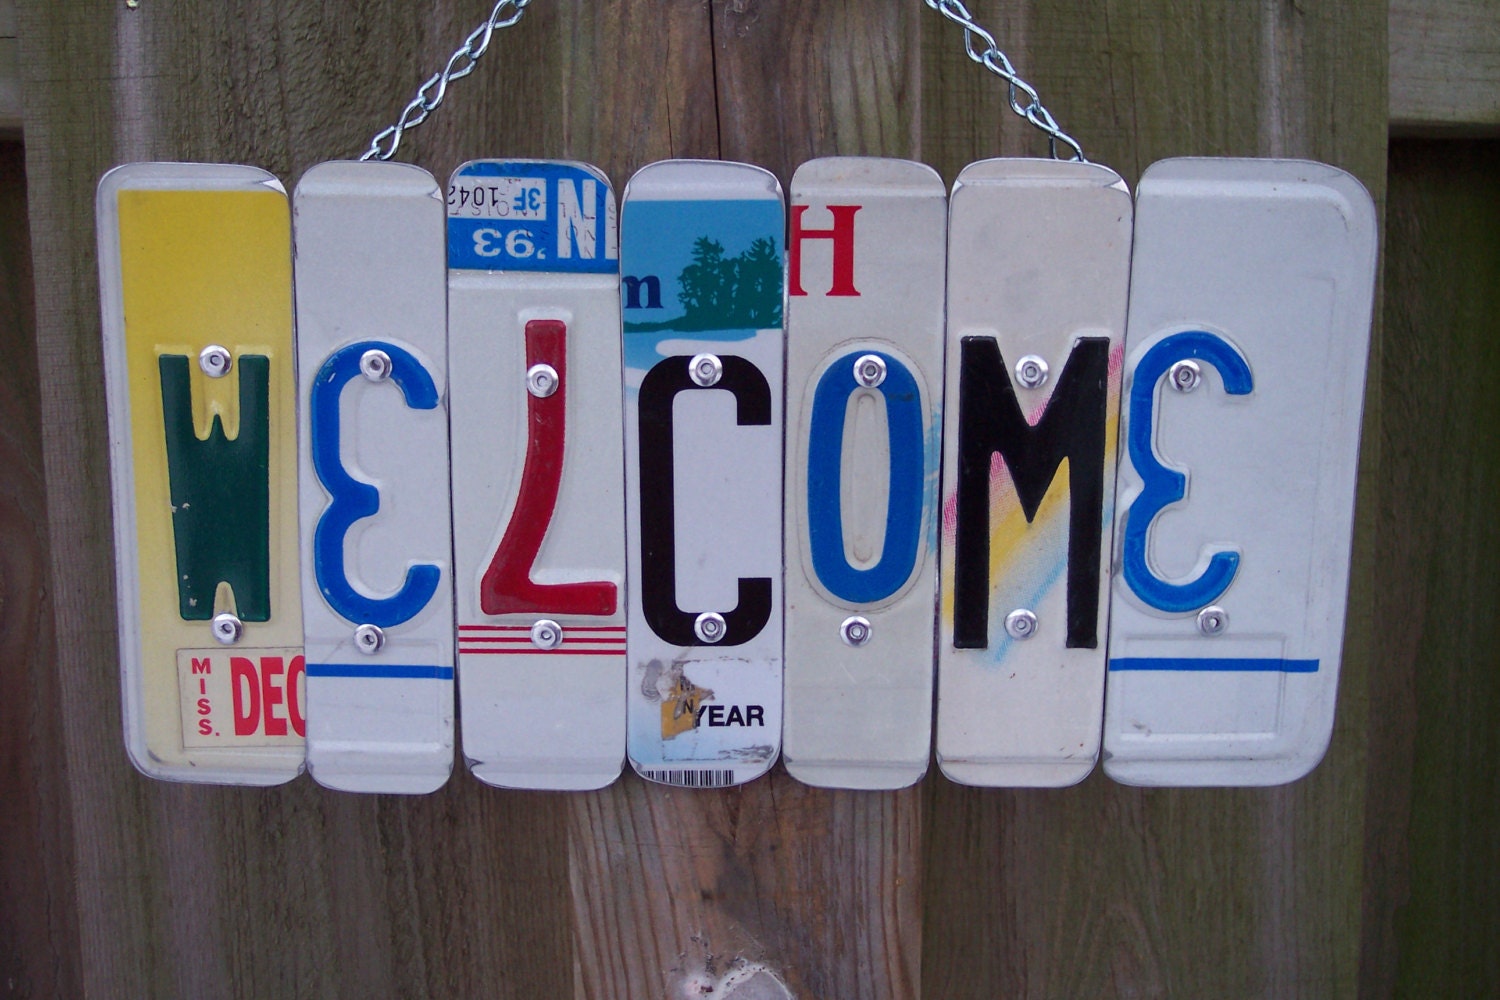 WELCOME Sign Recycled - Repurposed - Upcycled WELCOME License Plate Wall Hanging